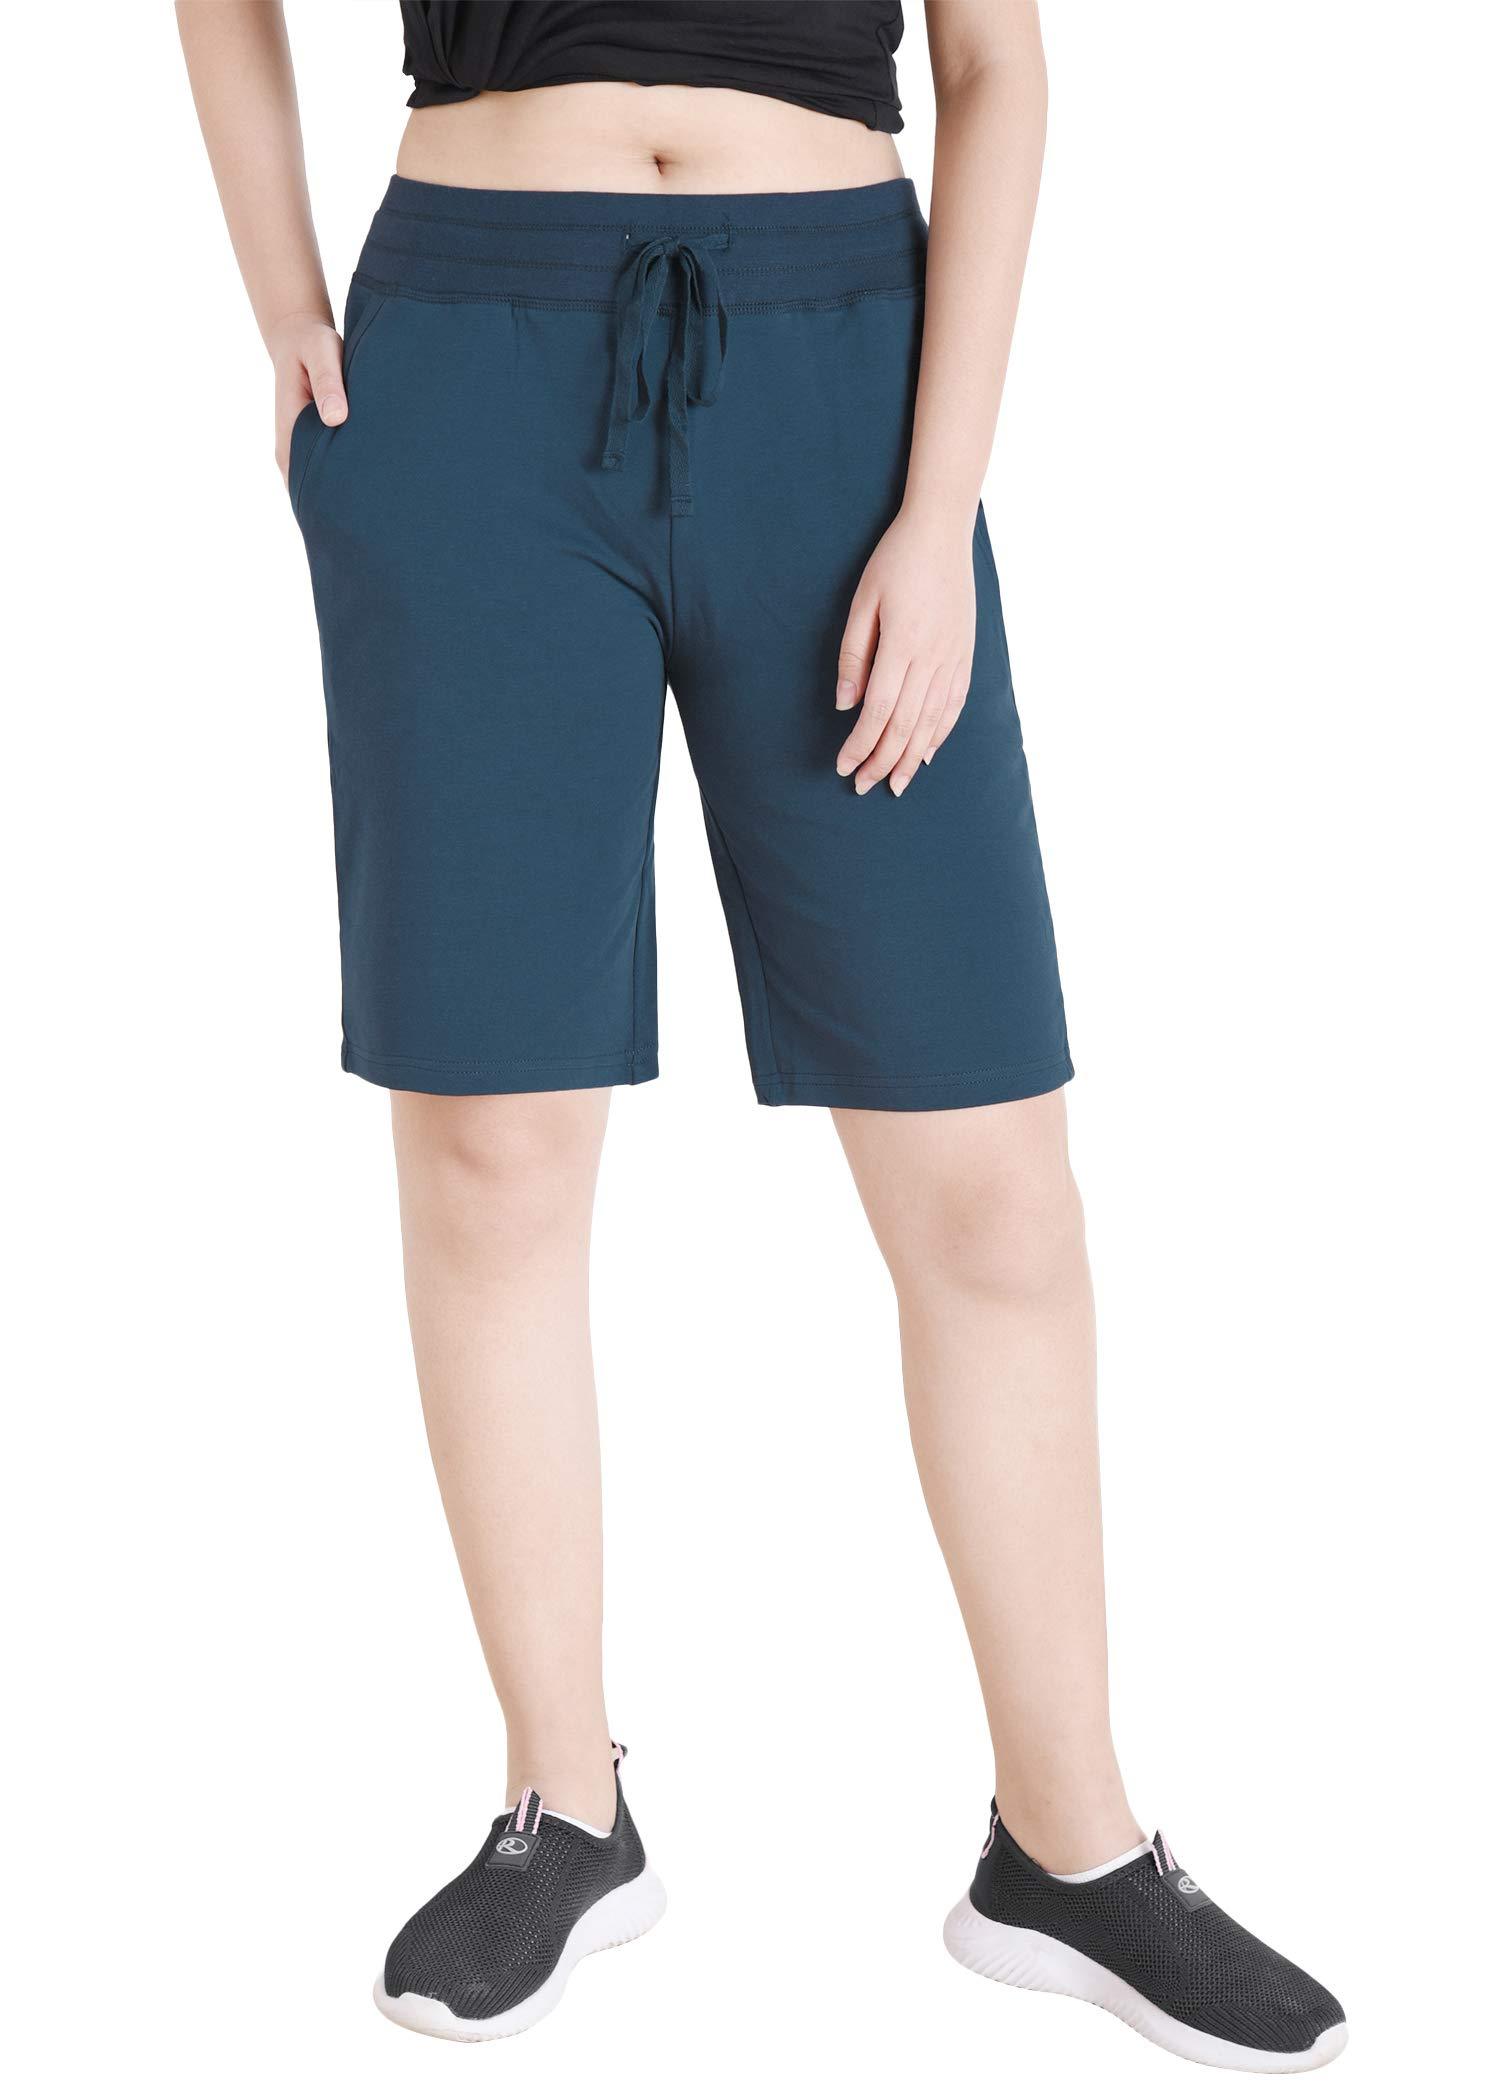 women's cotton jersey shorts with pockets